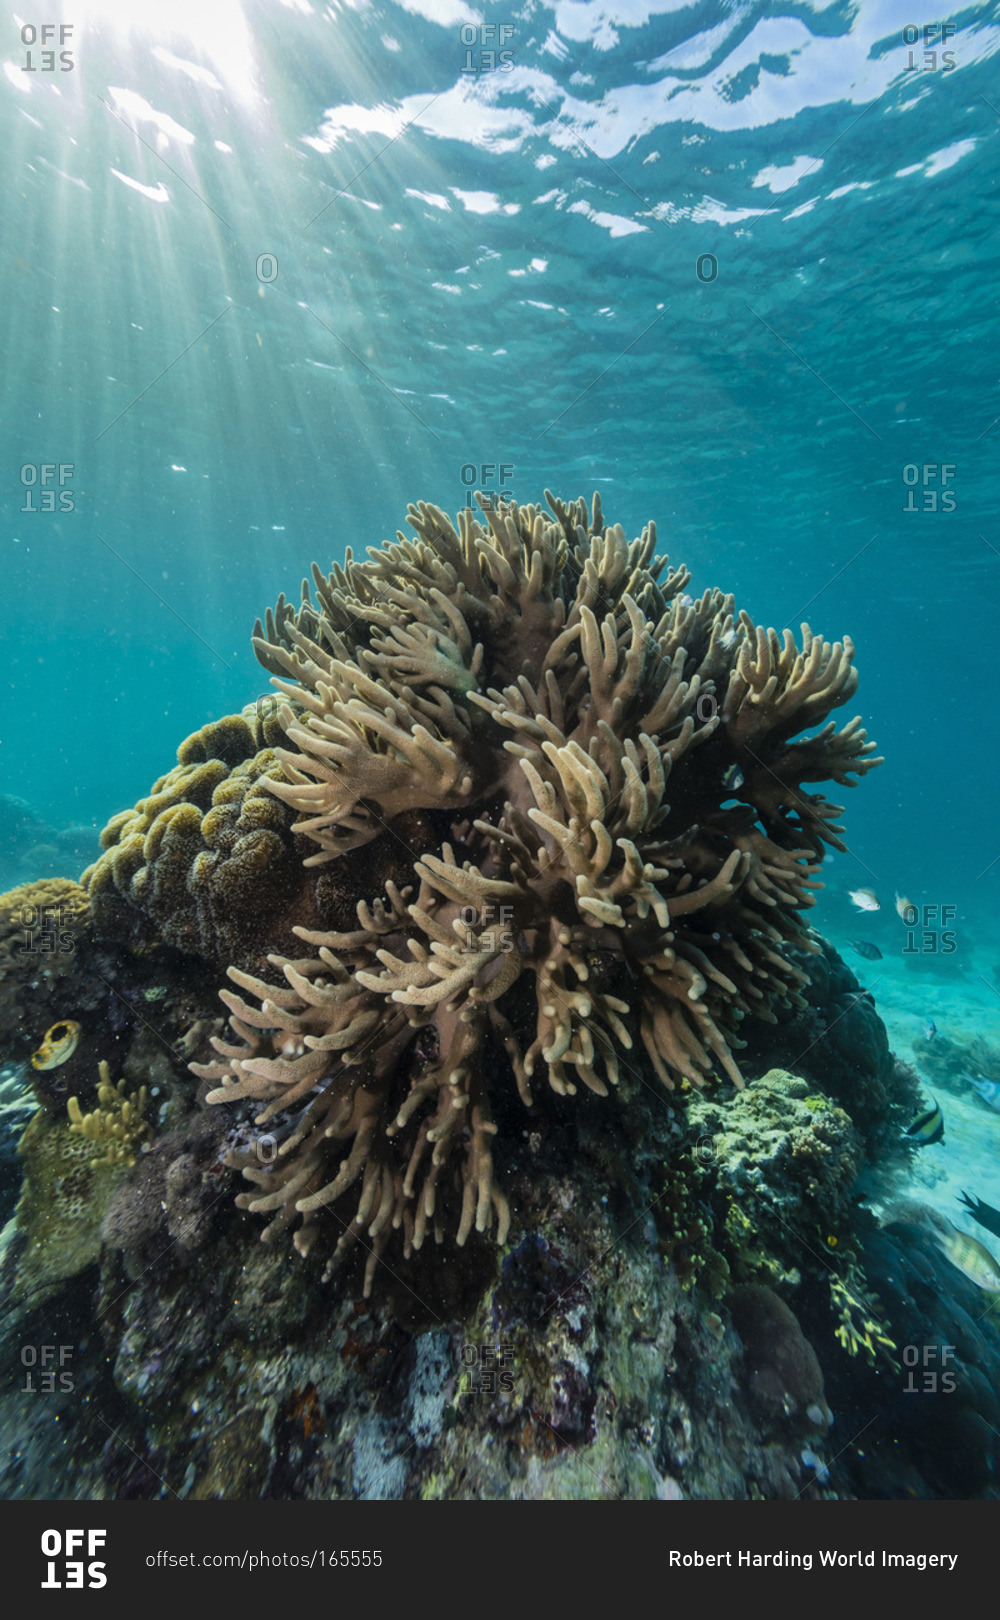 A profusion of hard and soft coral underwater on Tengah Besar Island, Komodo Island National Park, Indonesia